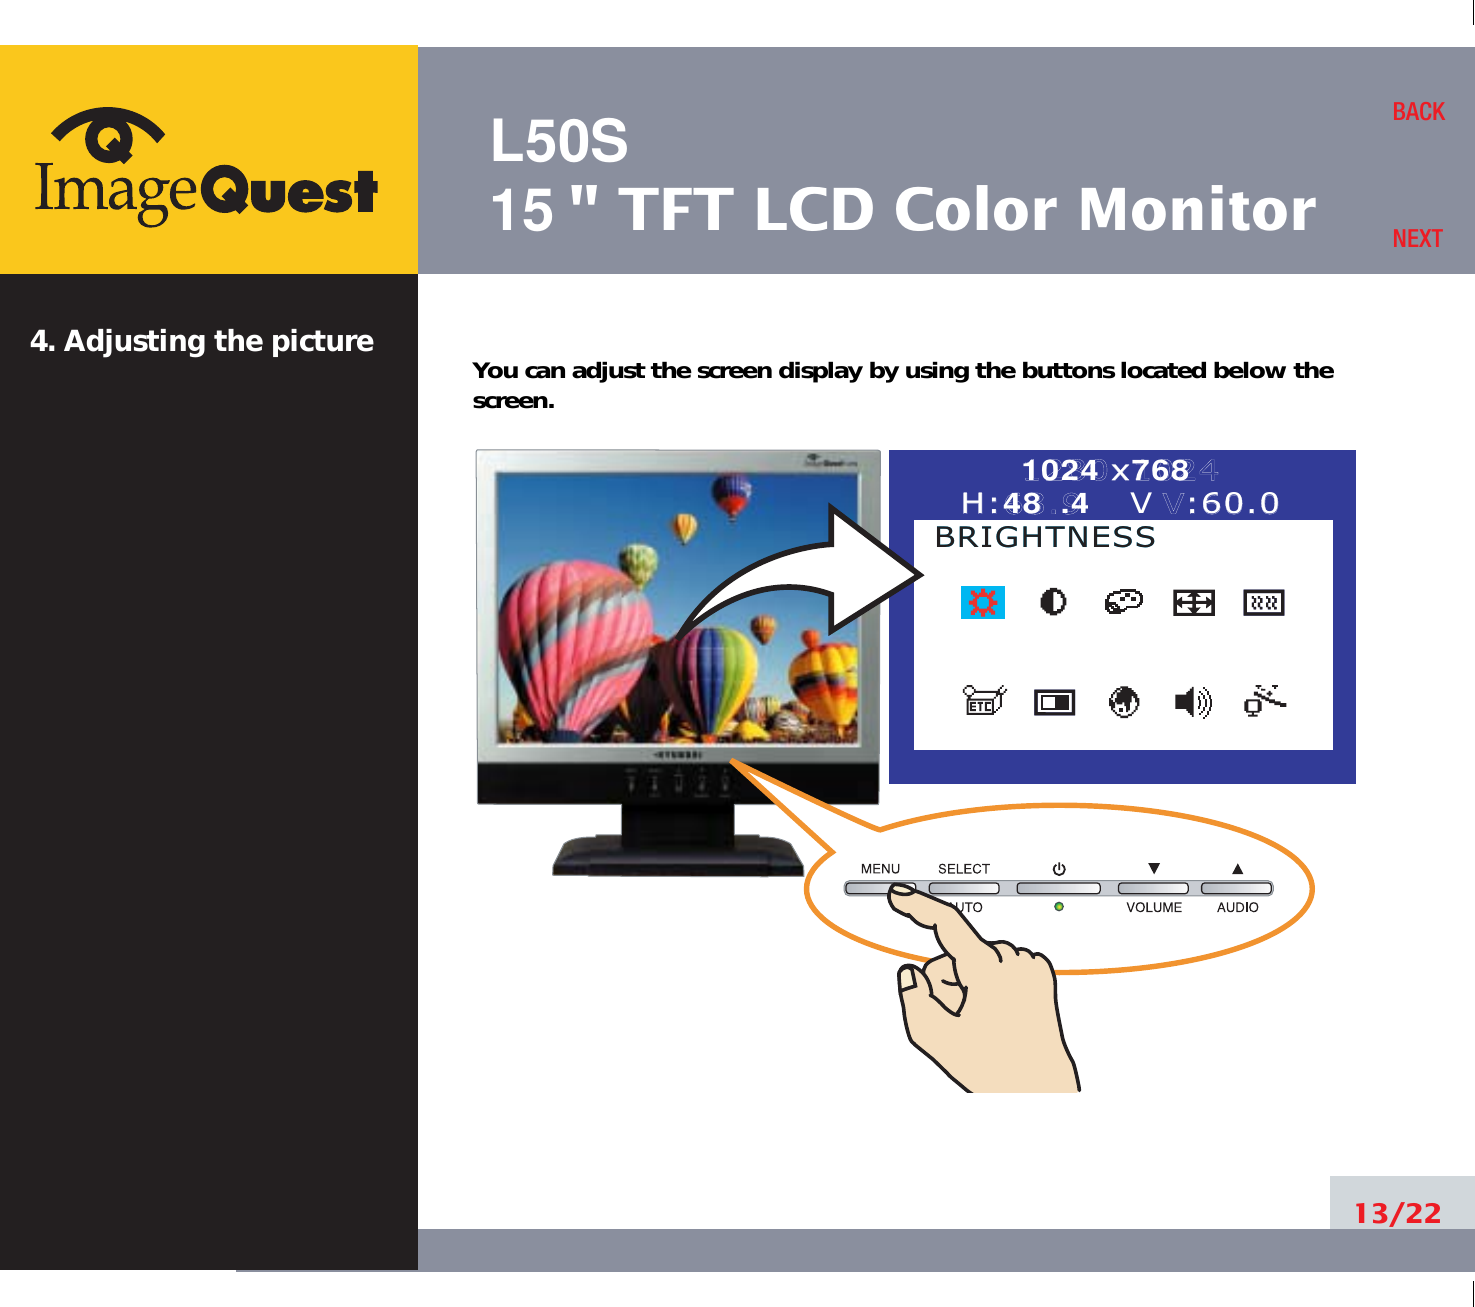 L50S15&quot; TFT LCD Color Monitor4. Adjusting the picture13/22BACKNEXTYou can adjust the screen display by using the buttons located below thescreen.1024 x7681280x1024H:48 .4   VH:63.9      V:60.0:60.0BRIGHTNESSBRIGHTNESS